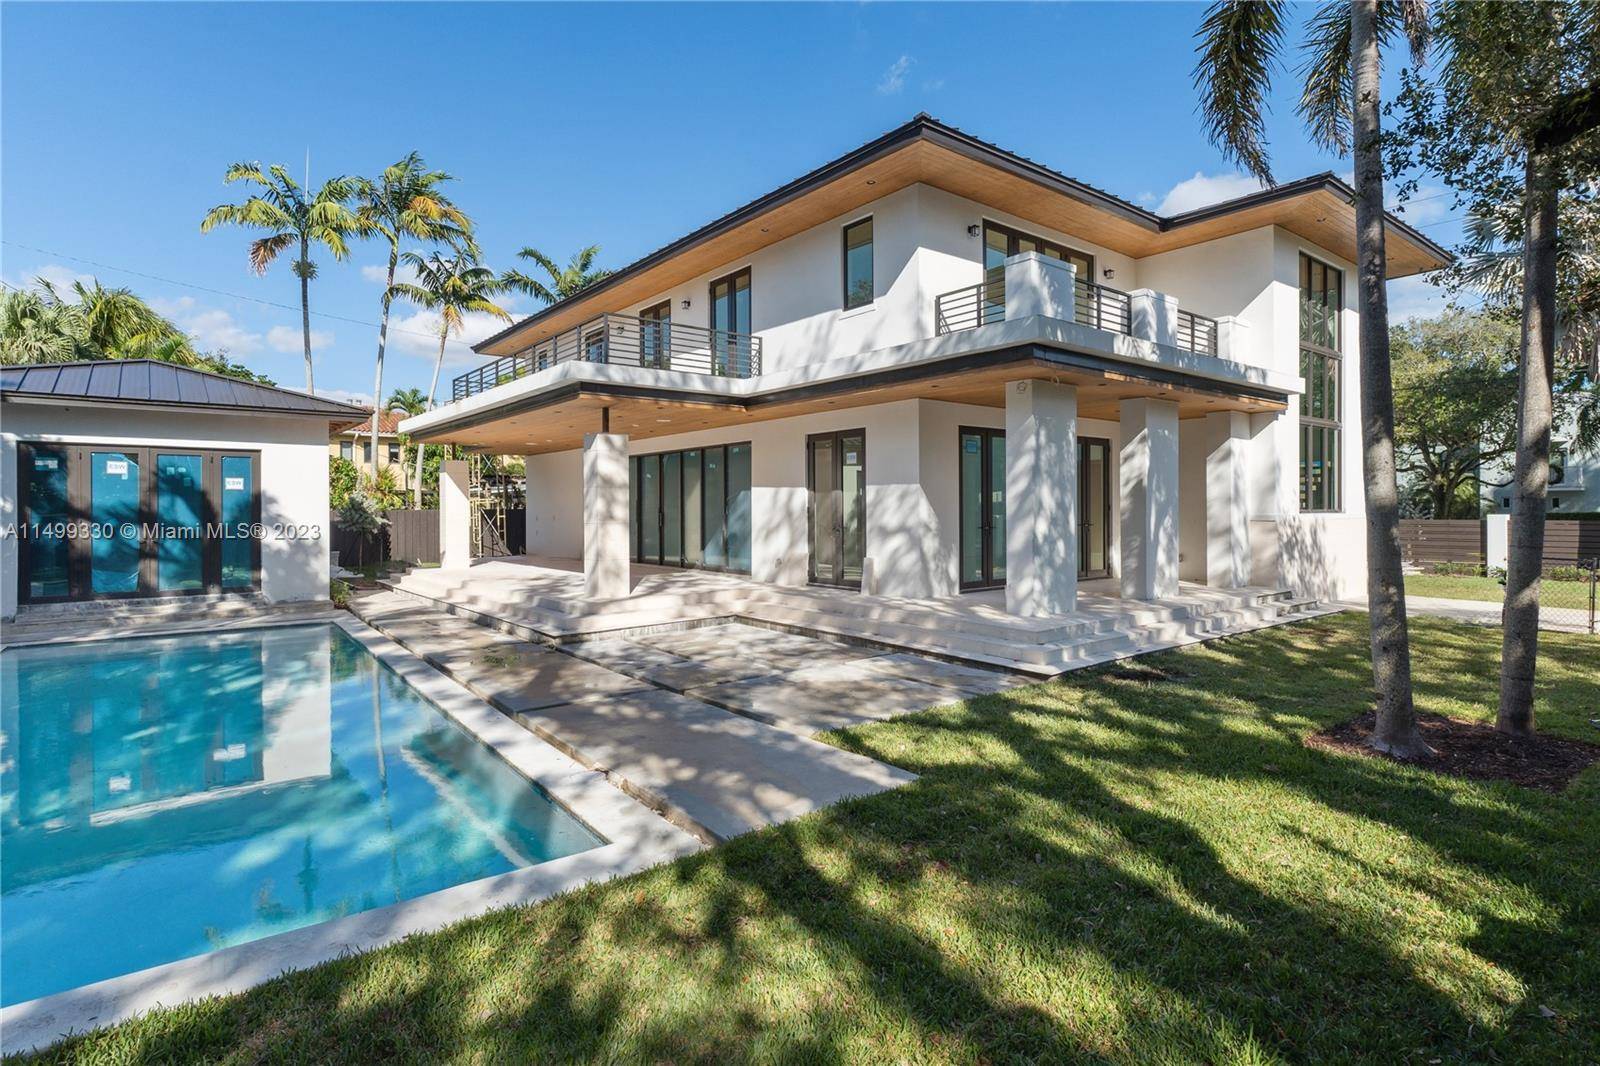 New construction contemporary masterpiece, perfectly positioned on a corner lot facing a tree lined pedestrian friendly street.